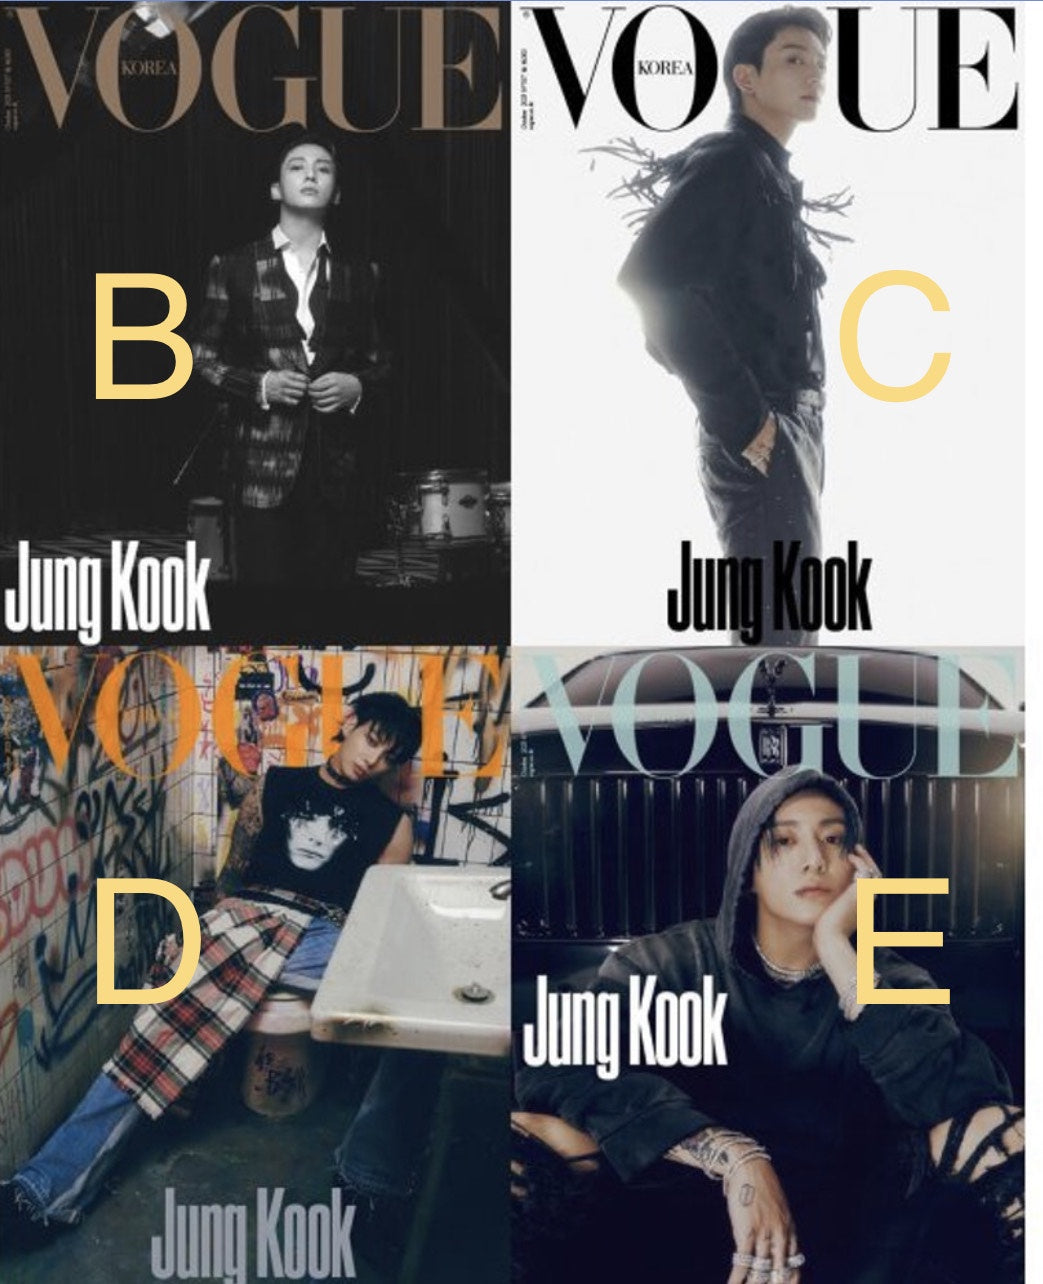 Who is Jungkook? Why was he chosen for the solo cover of Vogue